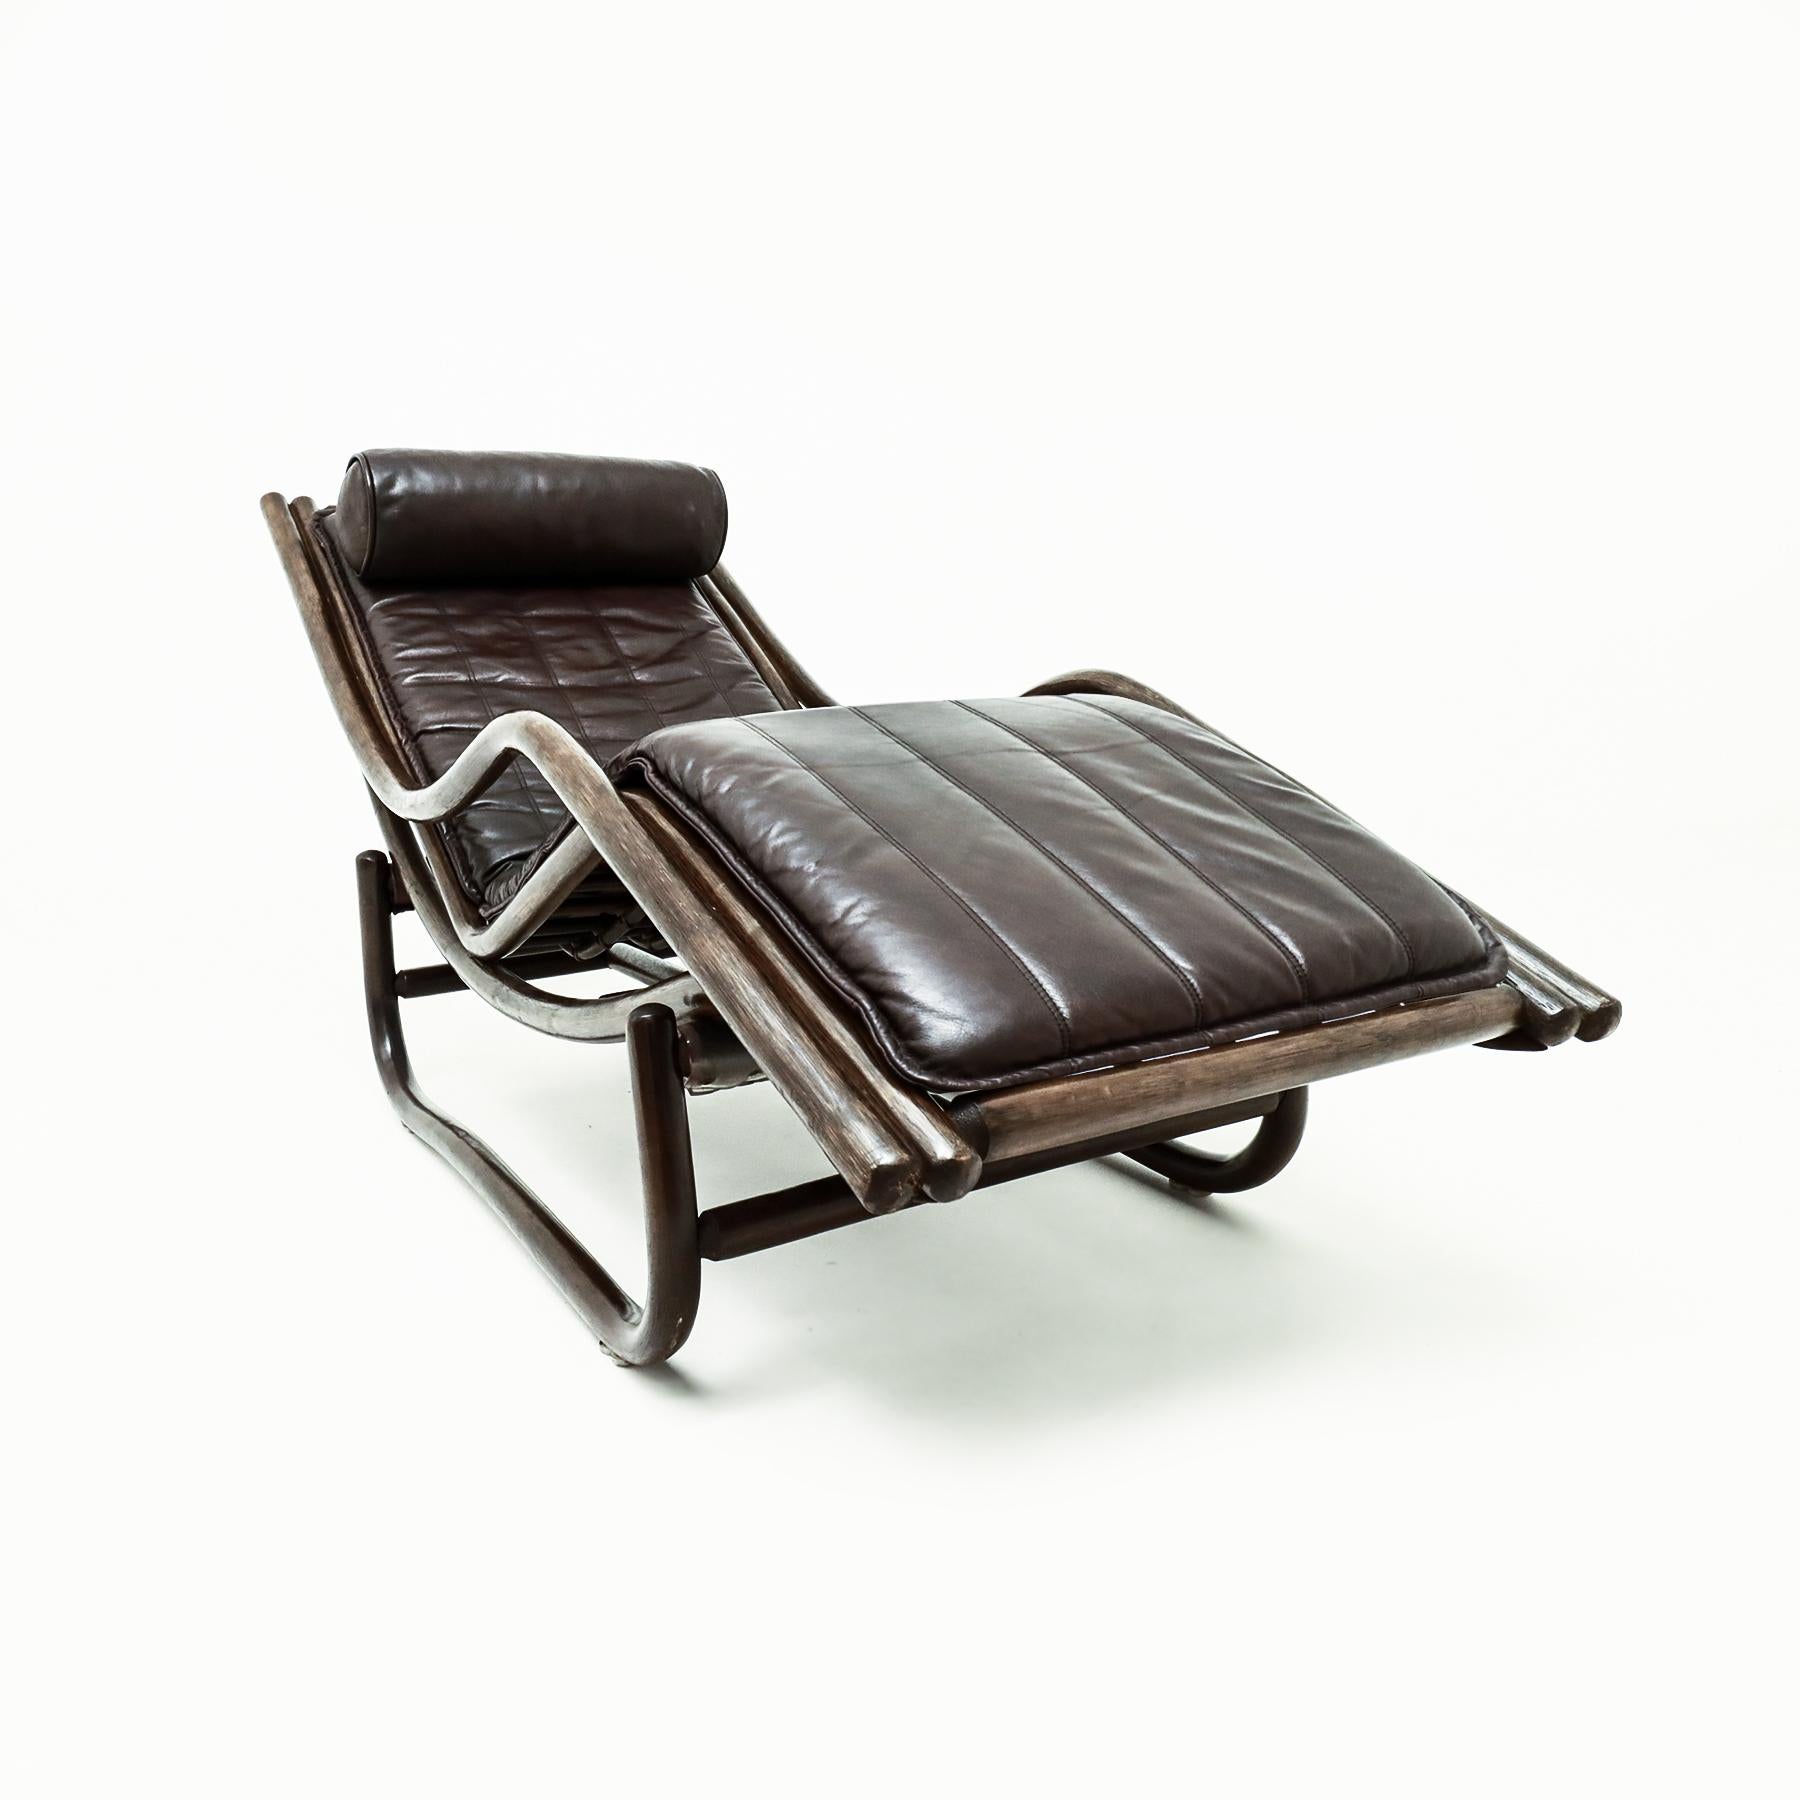 Dutch Cane and leather LC4 style chaise longue in the style of Rohe Noordwolde